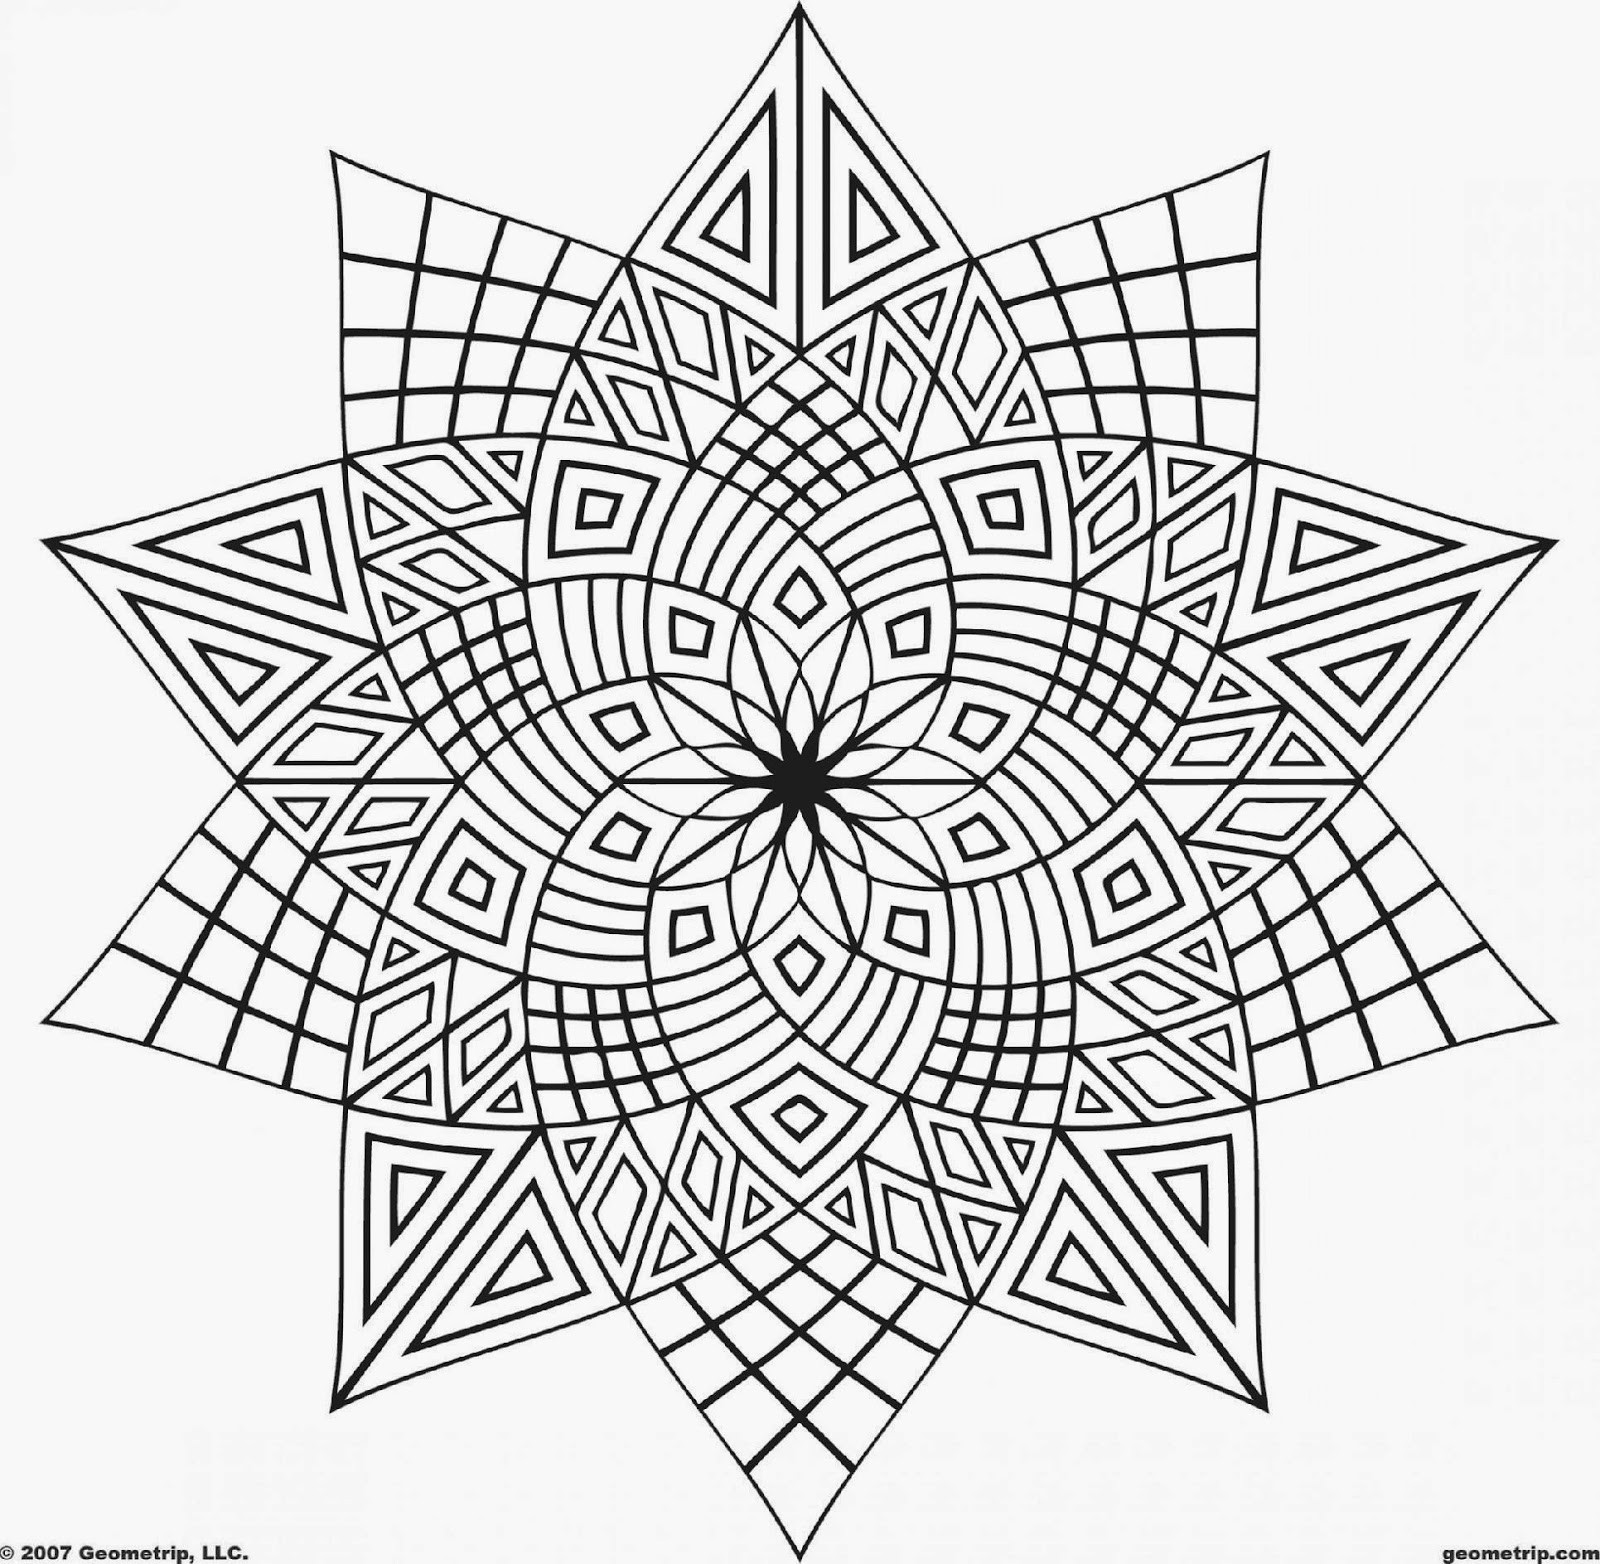 Download 21 Of the Best Ideas for Cool Printable Coloring Pages for Adults - Home Inspiration and Ideas ...